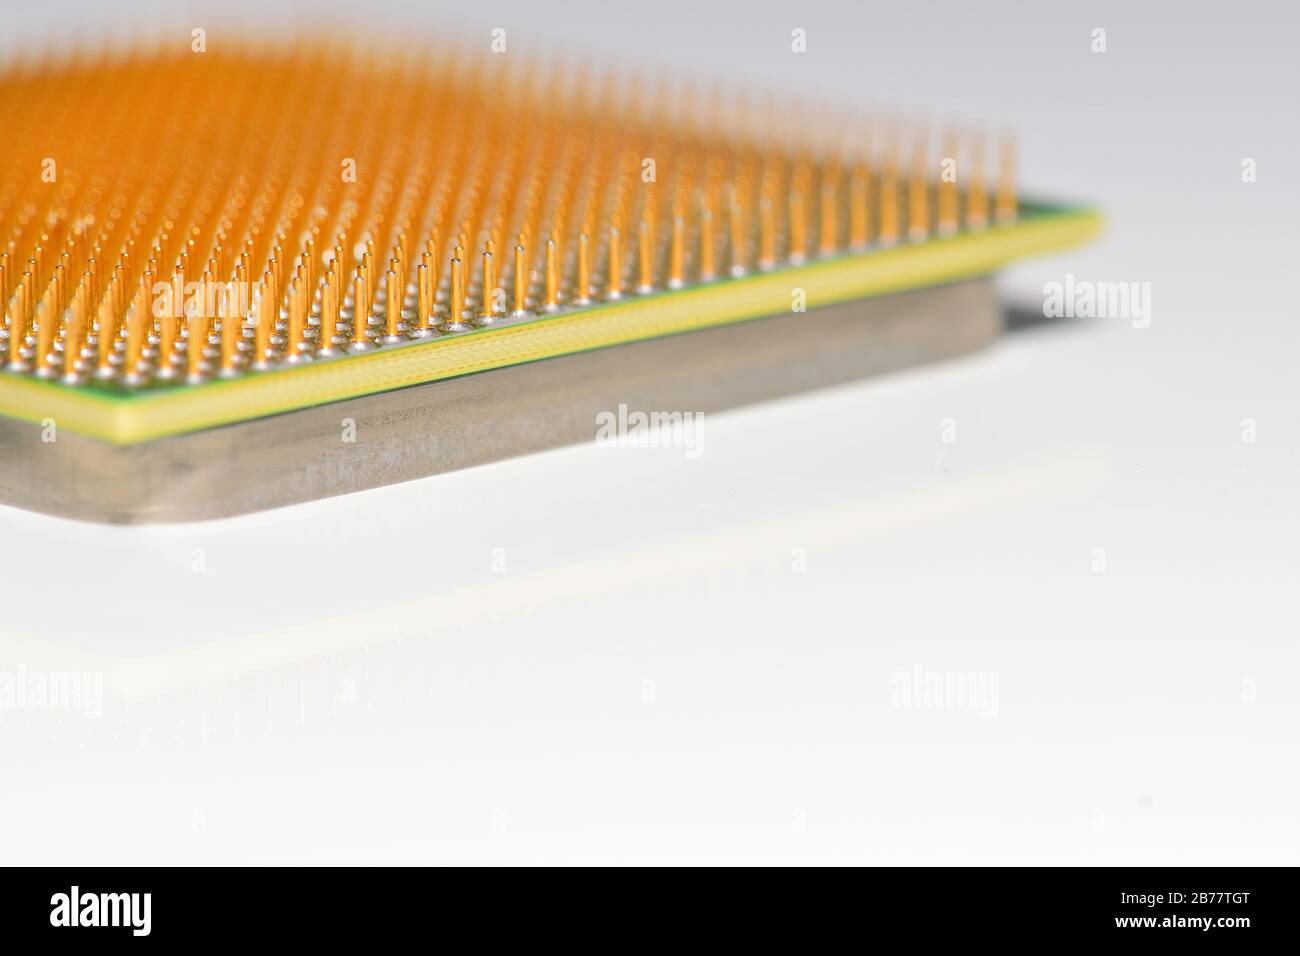 CPU - central processor unit. Golden pins of a core. Copy space. Shallow depth of field. Stock Photo